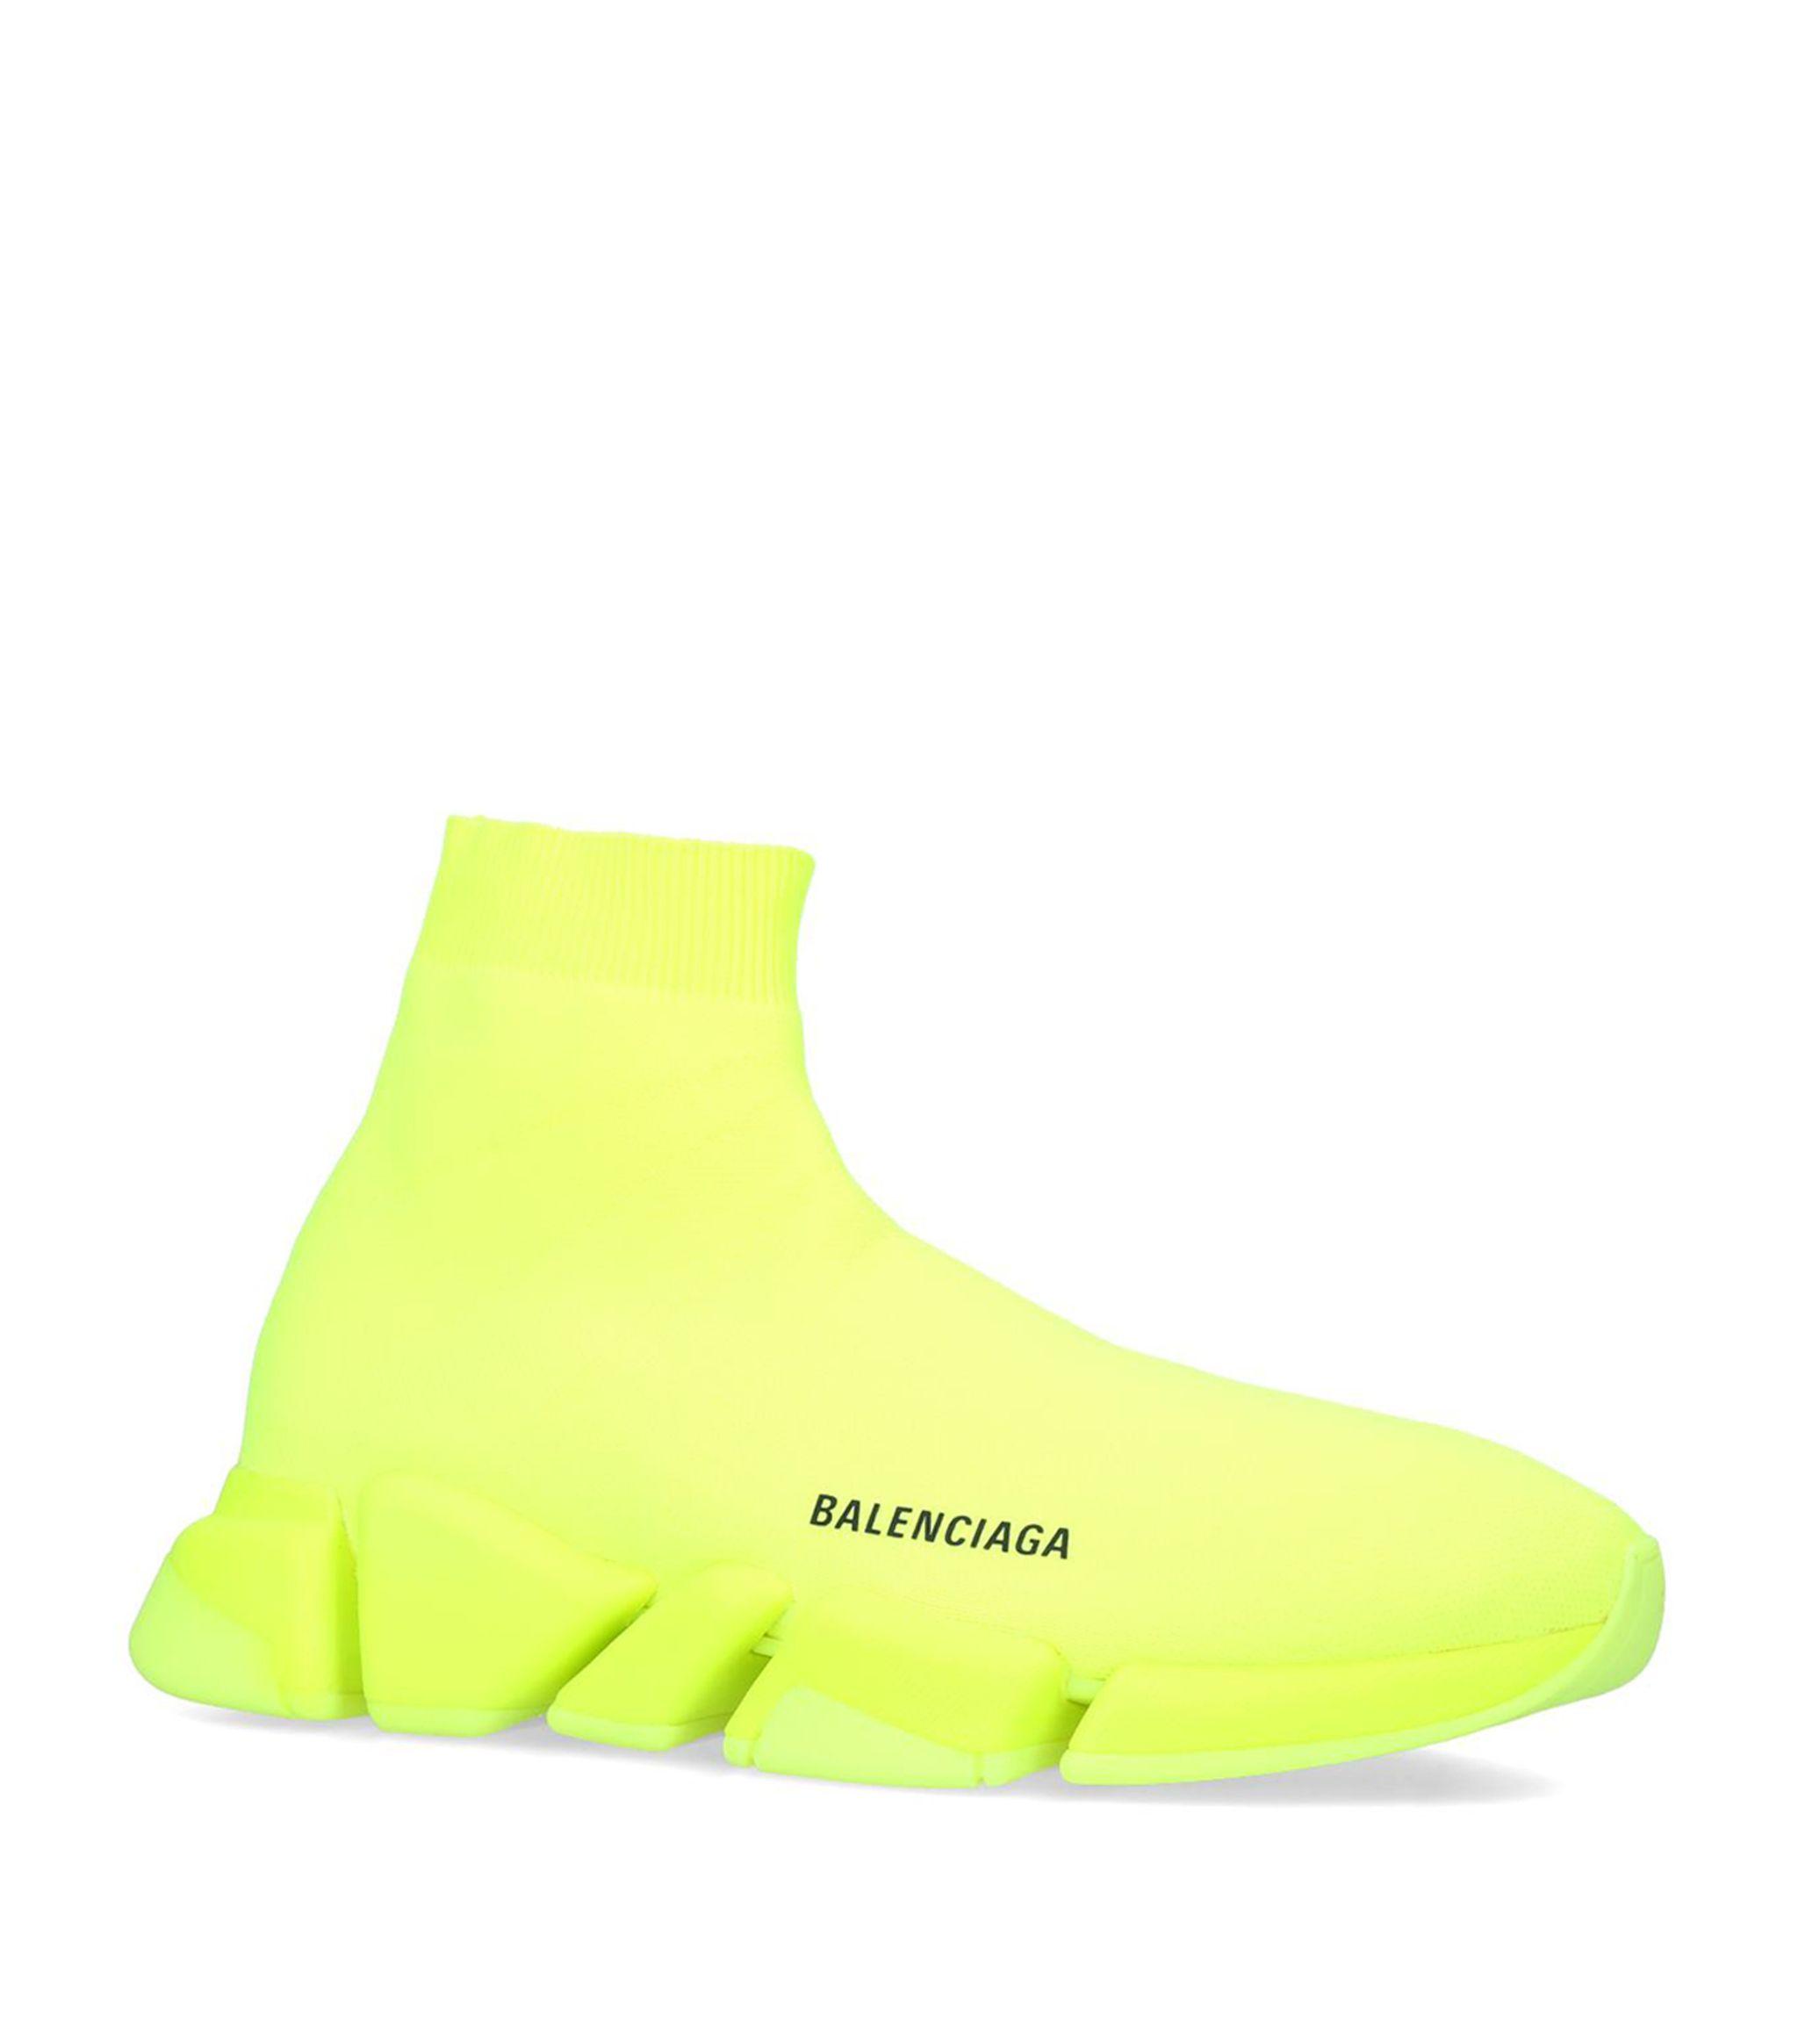 Balenciaga Synthetic Speed 2.0 Sneakers in Yellow for Men - Save 50% | Lyst